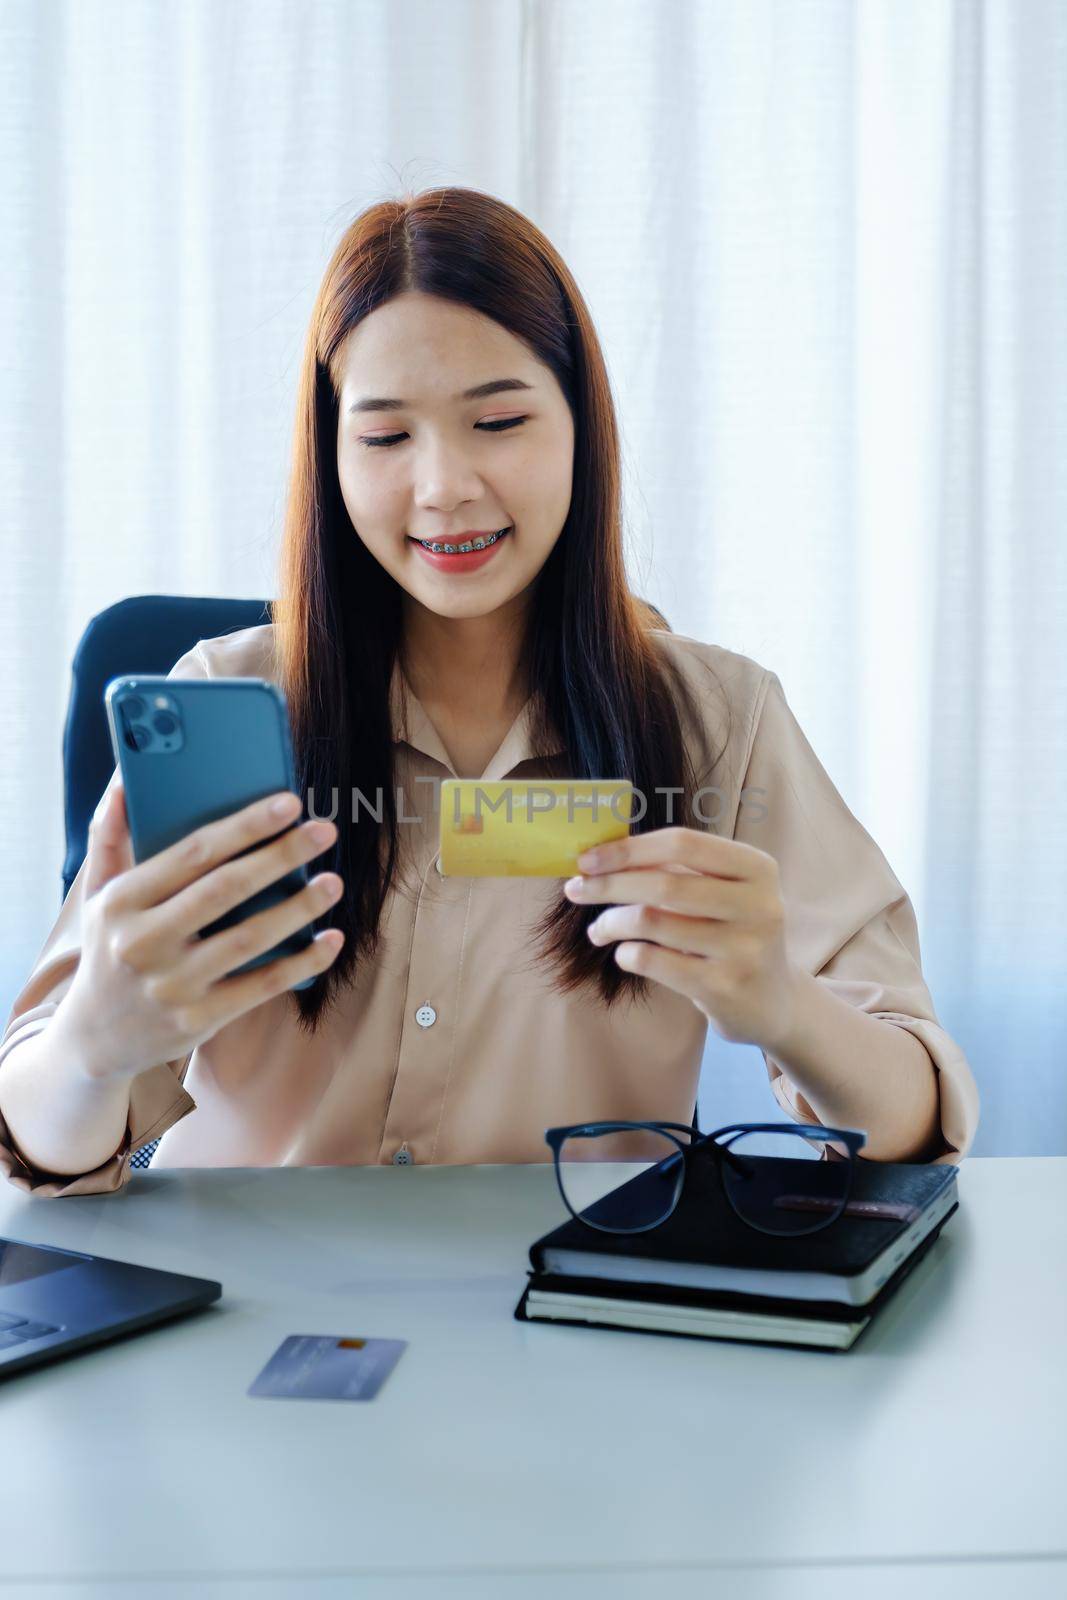 Online Shopping and Internet Payments, Beautiful Asian women are using their credit cards and mobile phones to shop online or conduct errands in the digital world. by Manastrong